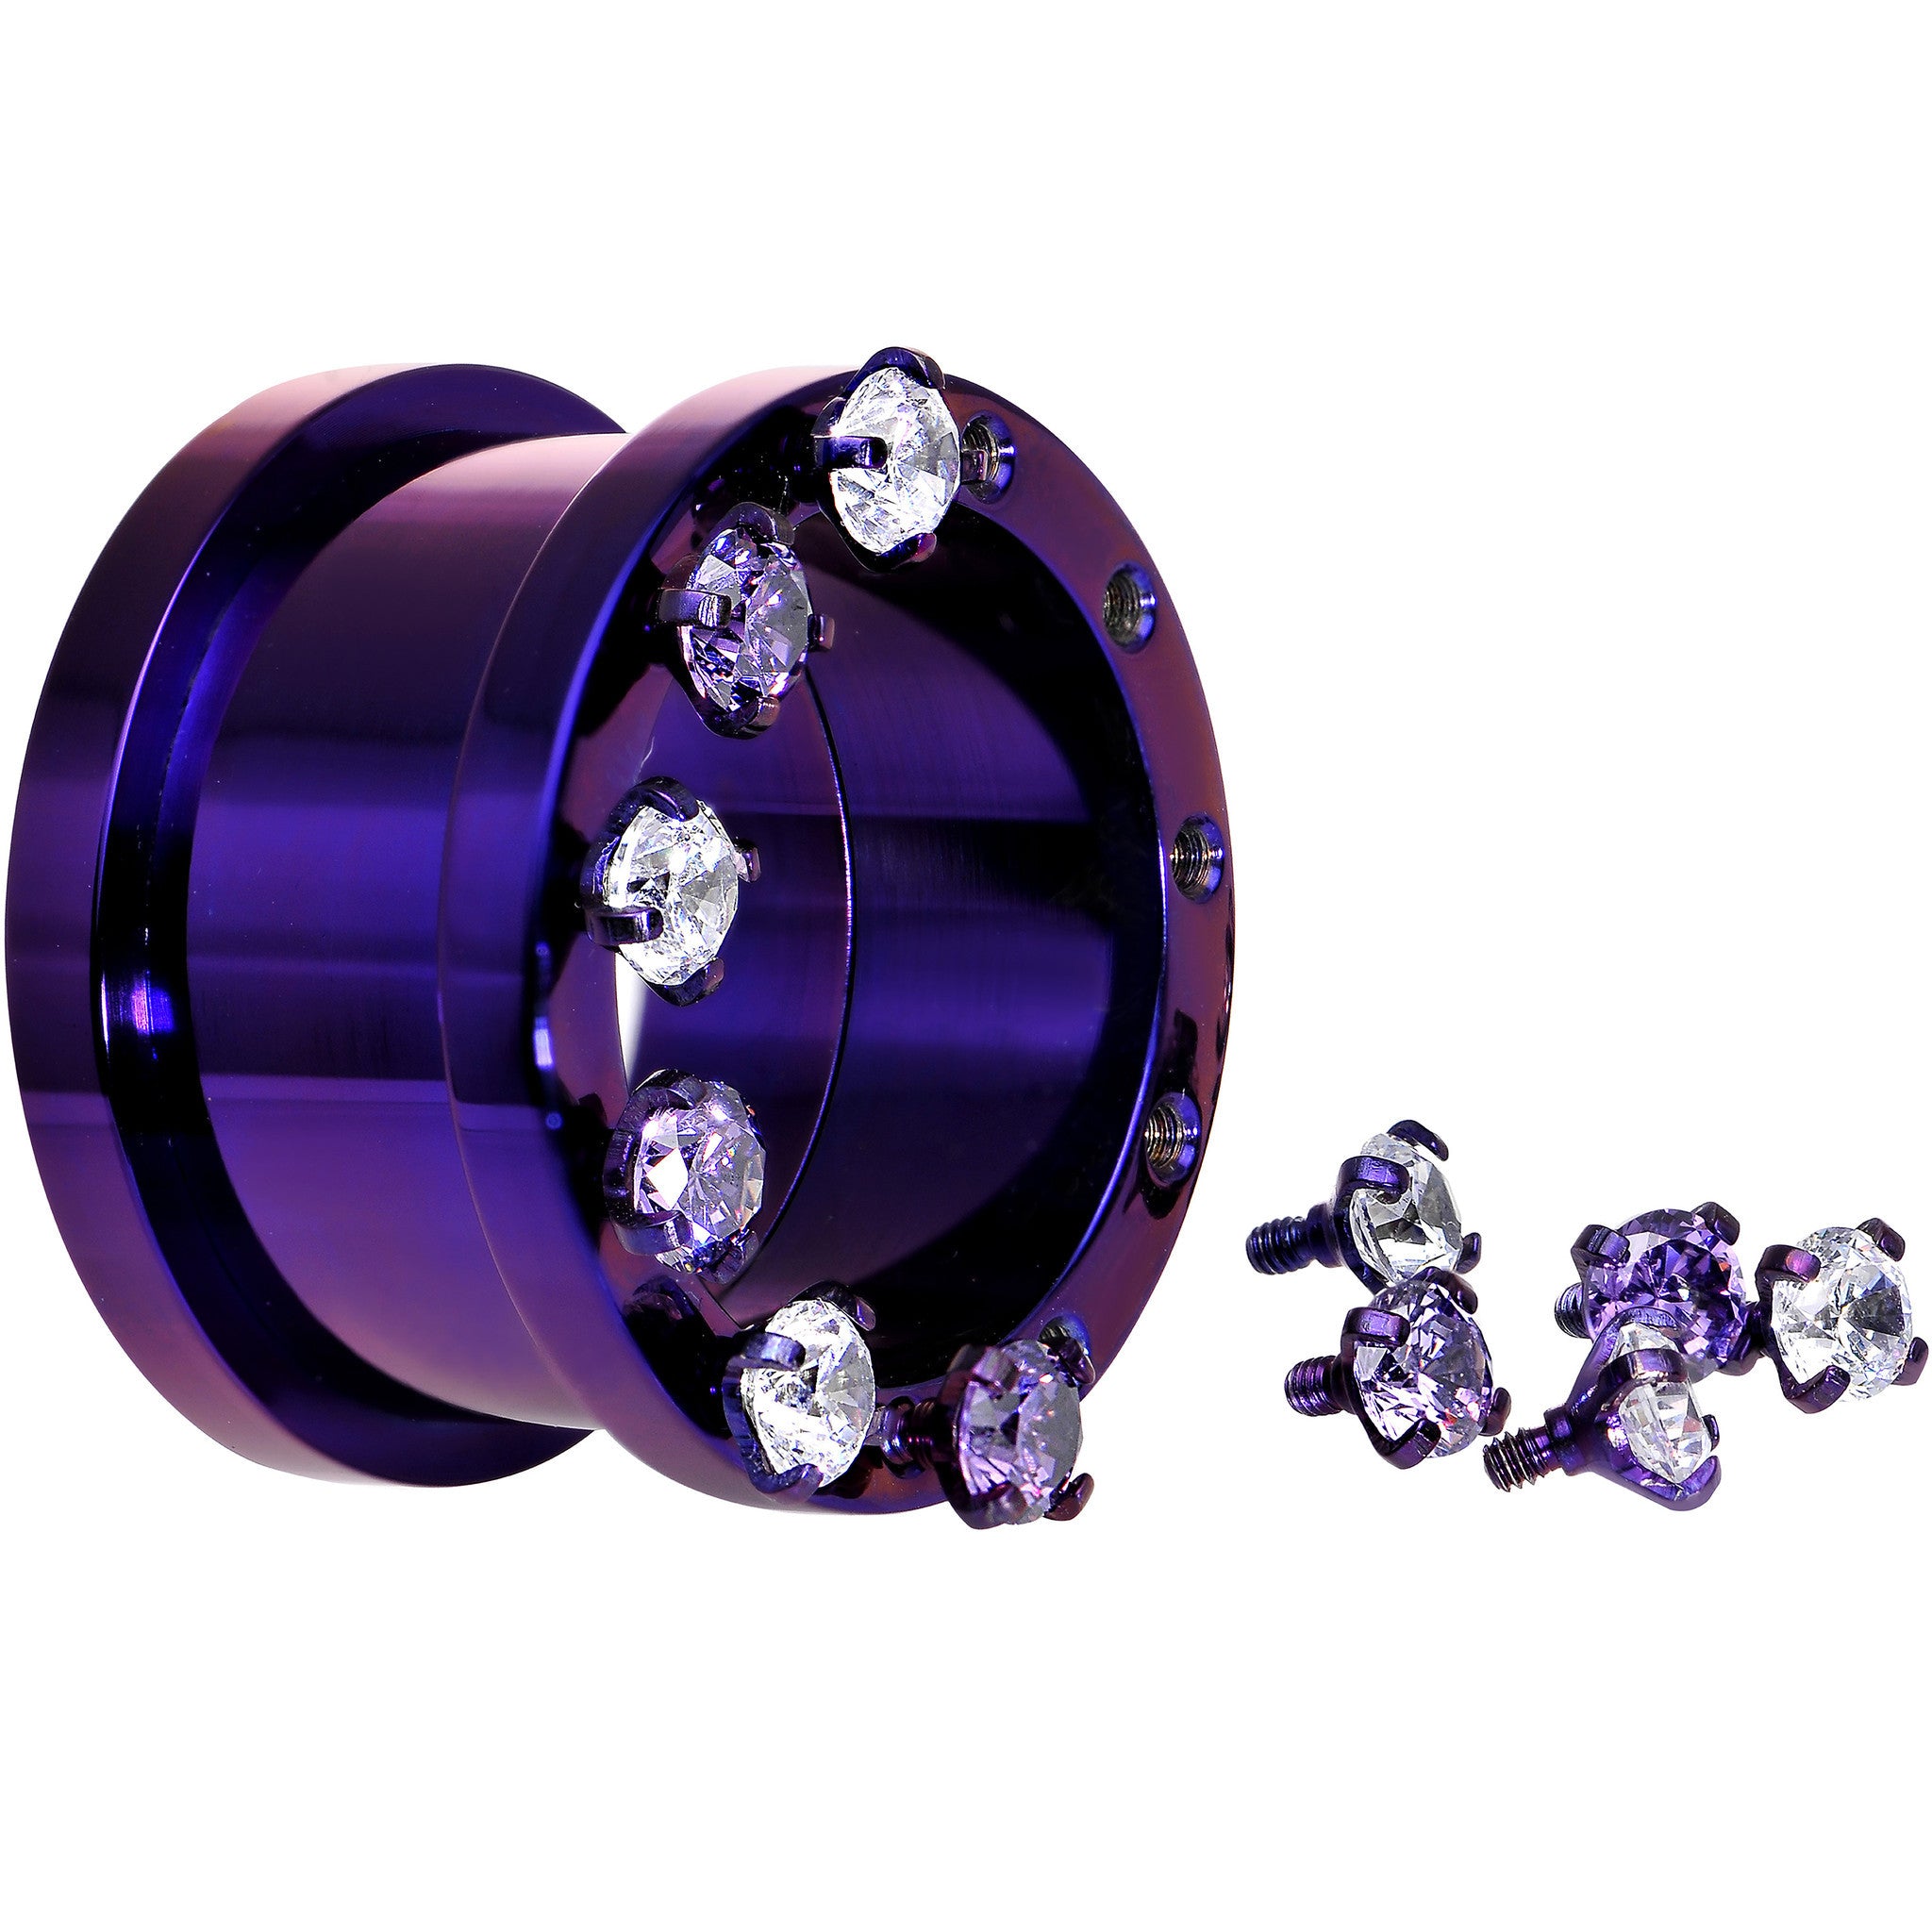 3/4 Purple Titanium Tunnels with Removable Dermal Tops